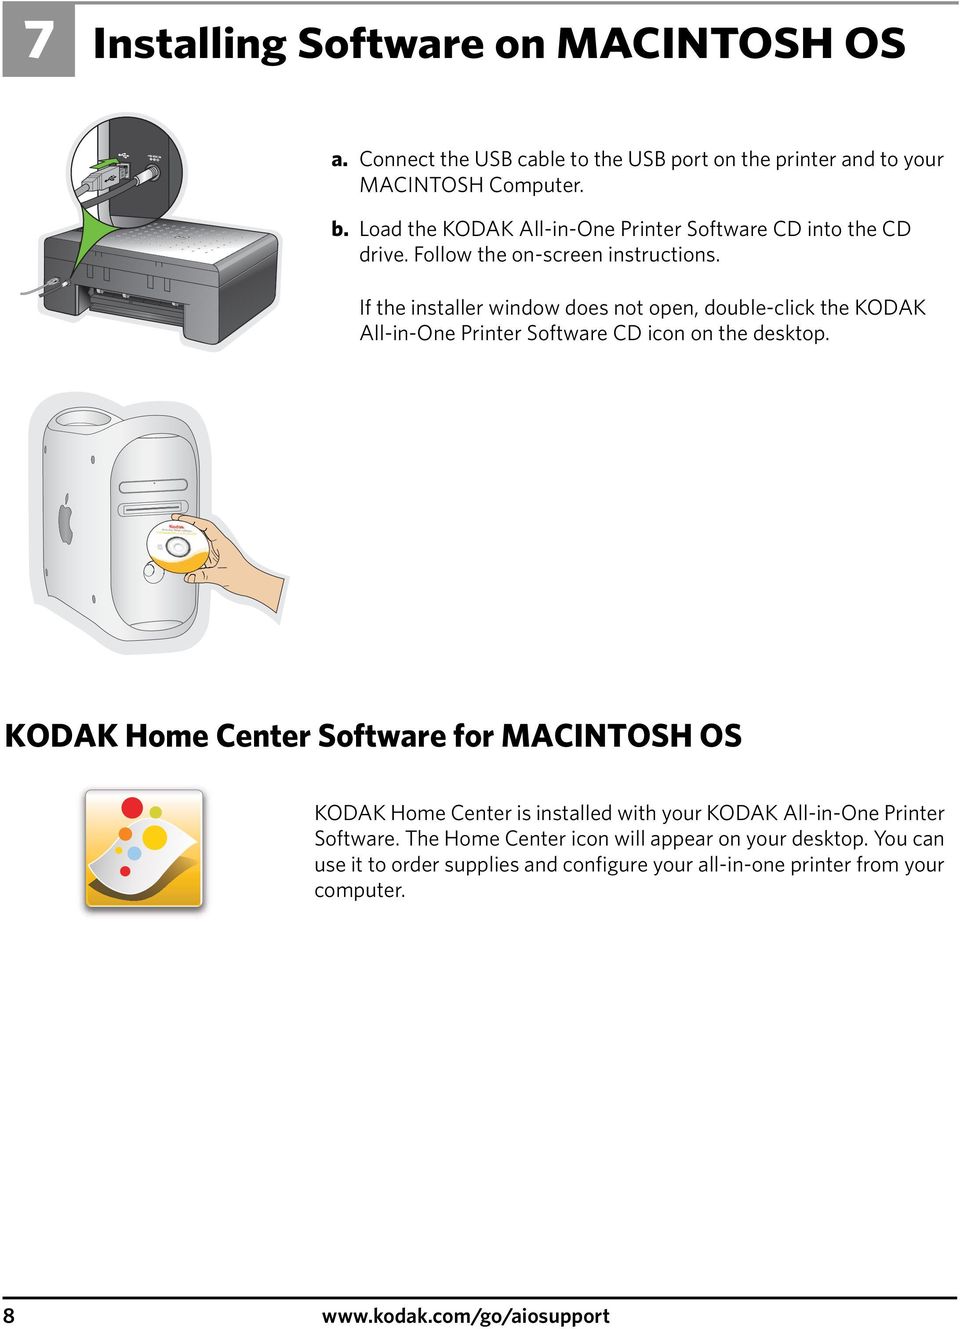 If the installer window does not open, double-click the KODAK All-in-One Printer Software CD icon on the desktop.